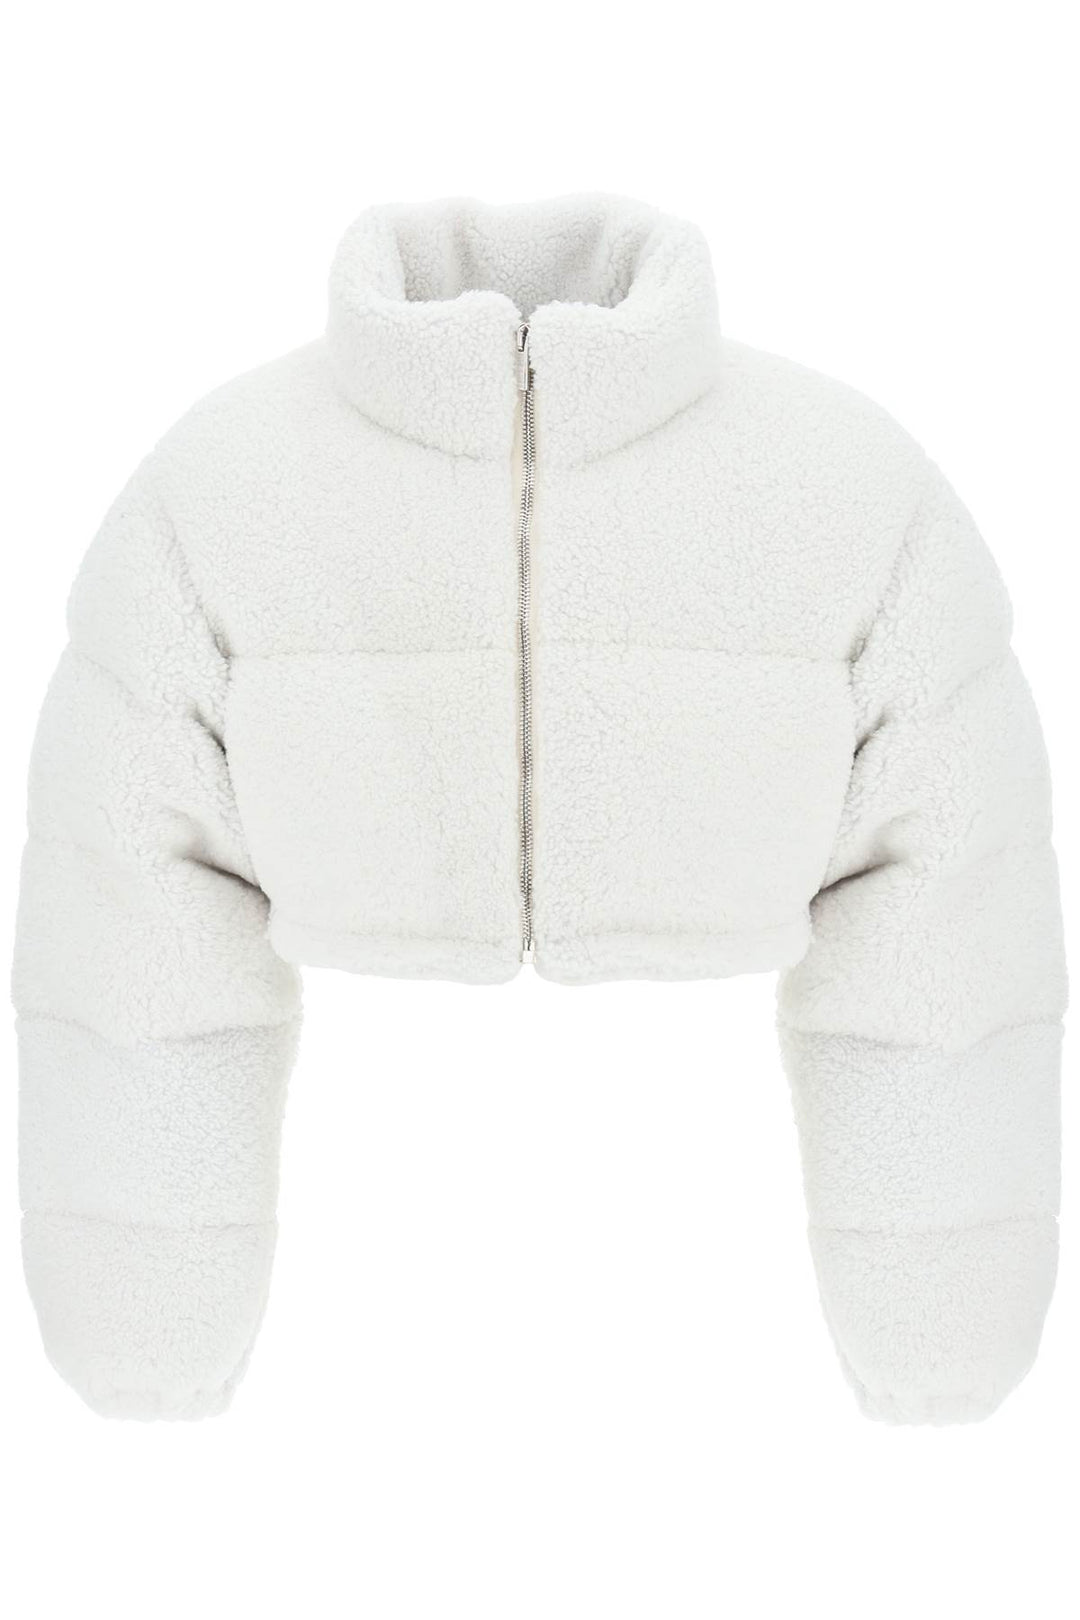 Vtmnts Cropped Shearling Puffer Jacket   Bianco